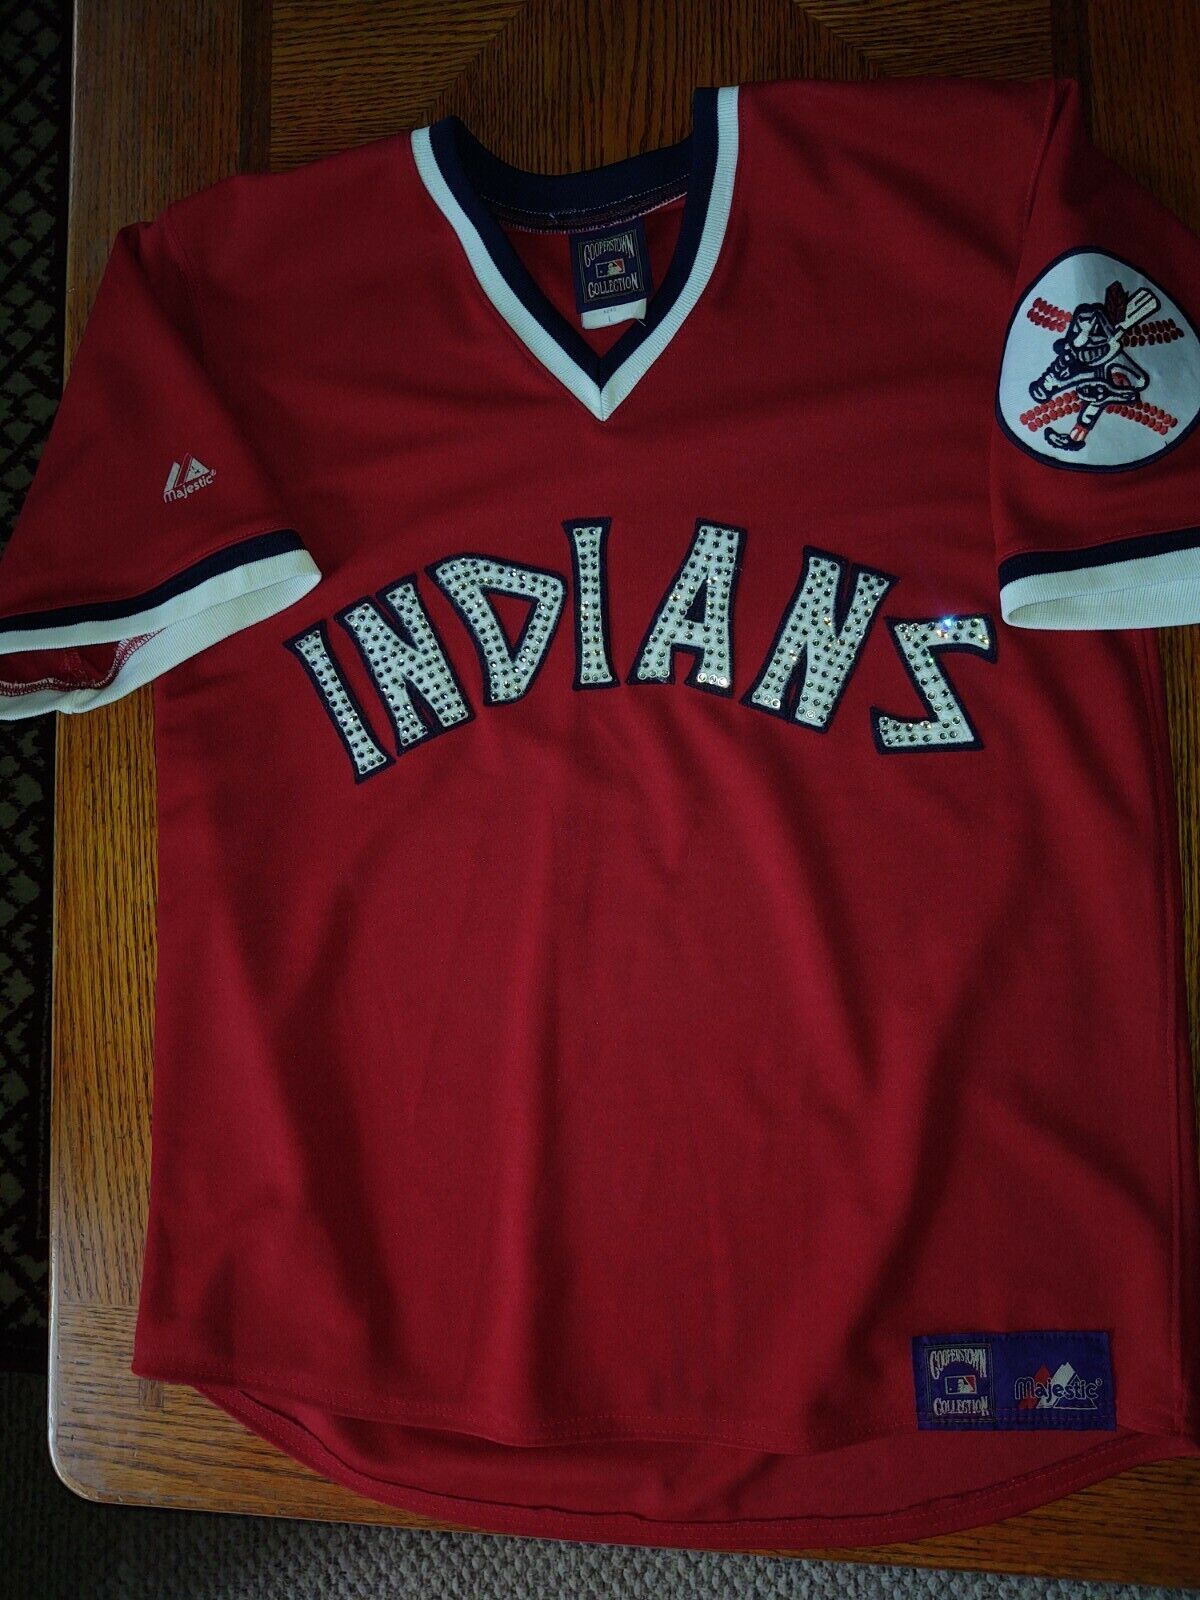 1976 CLEVELAND INDIANS JERSEY woman's Large